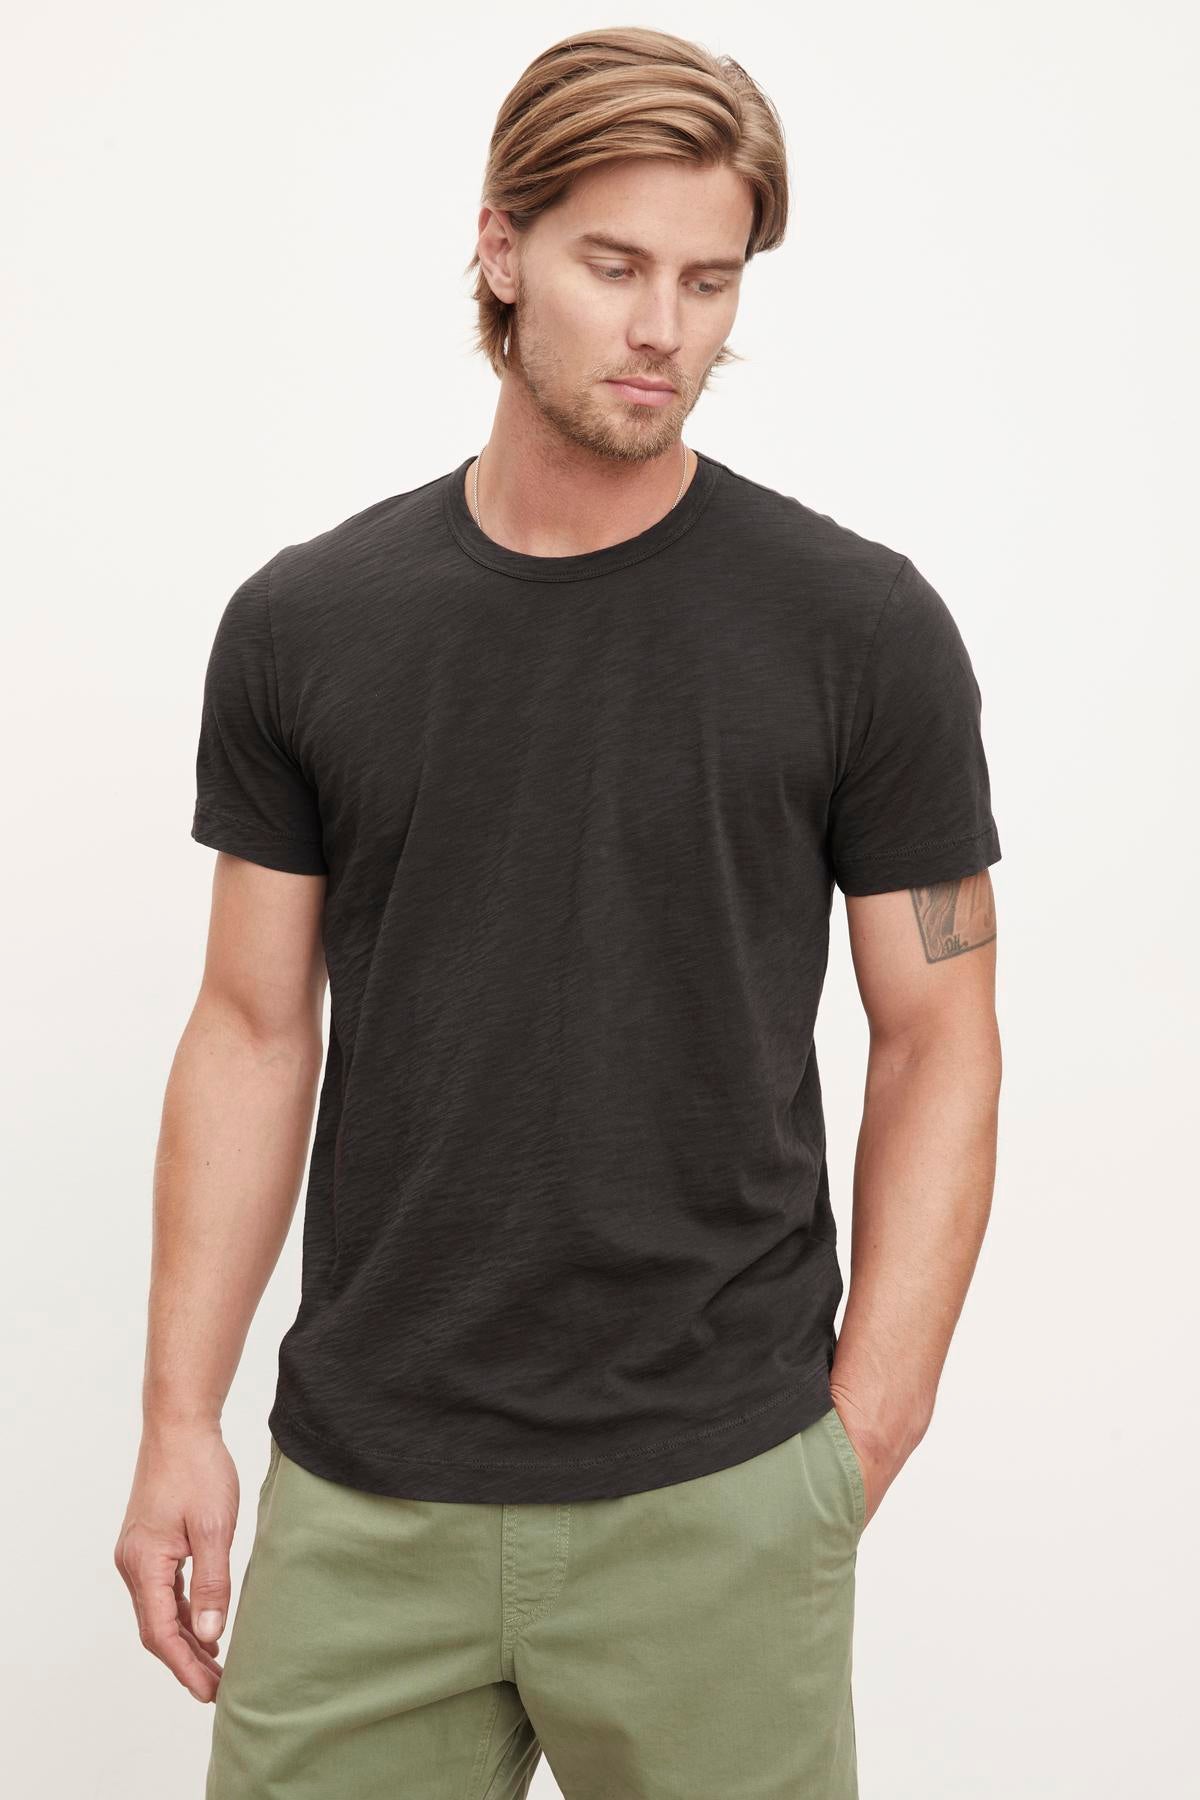   Man wearing a Velvet by Graham & Spencer heathered texture, dark grey AMARO TEE crew neck t-shirt and green pants. 